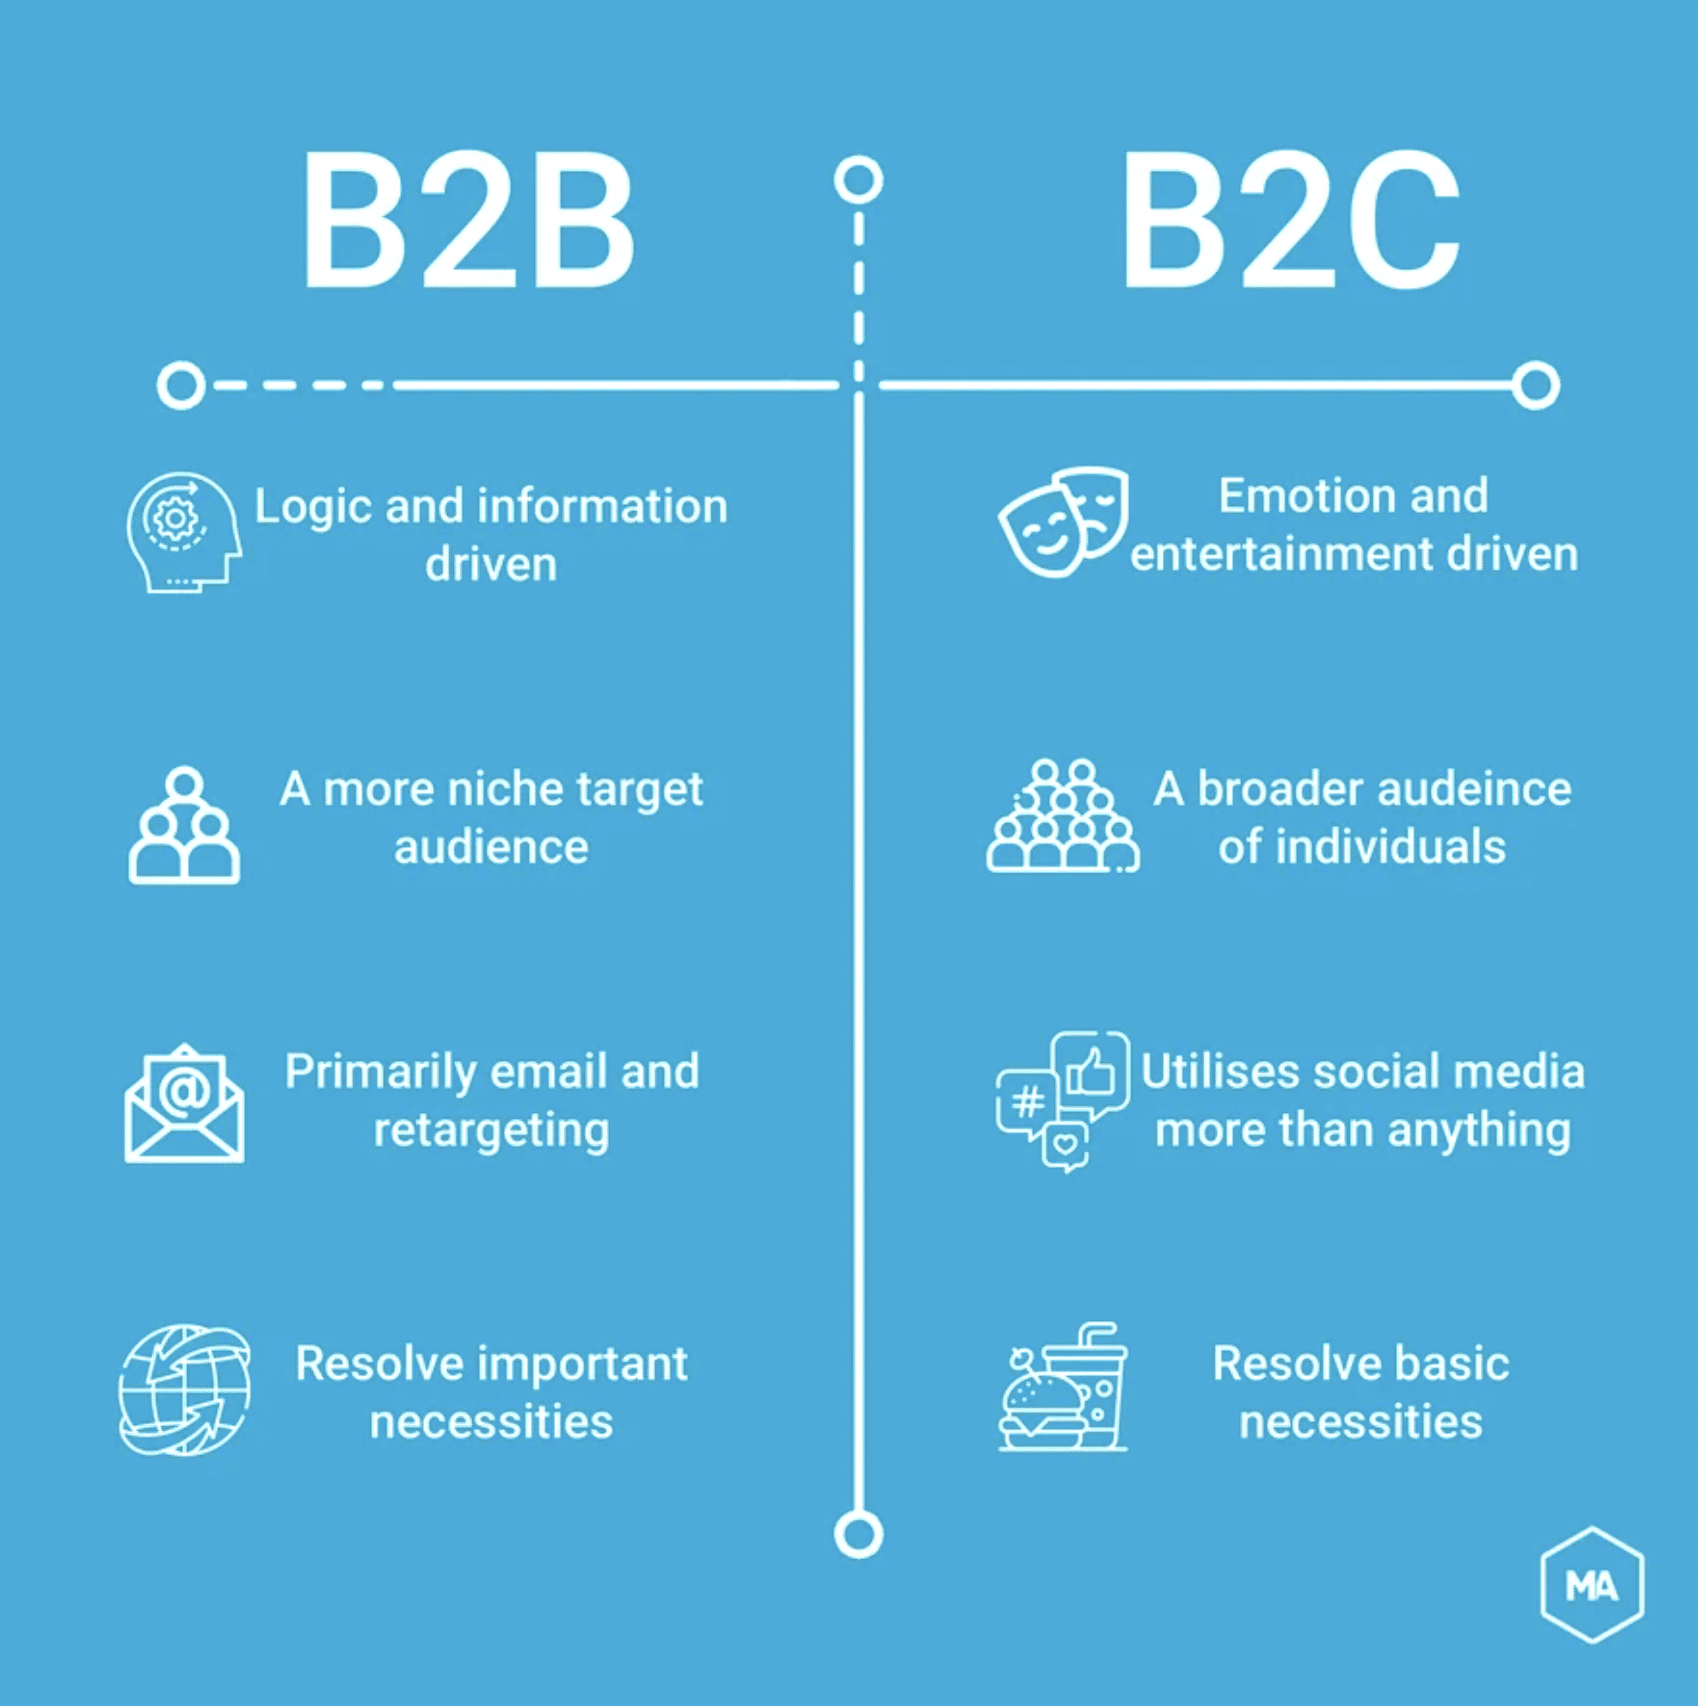 graphic outlines main differences between B2B and B2C marketing